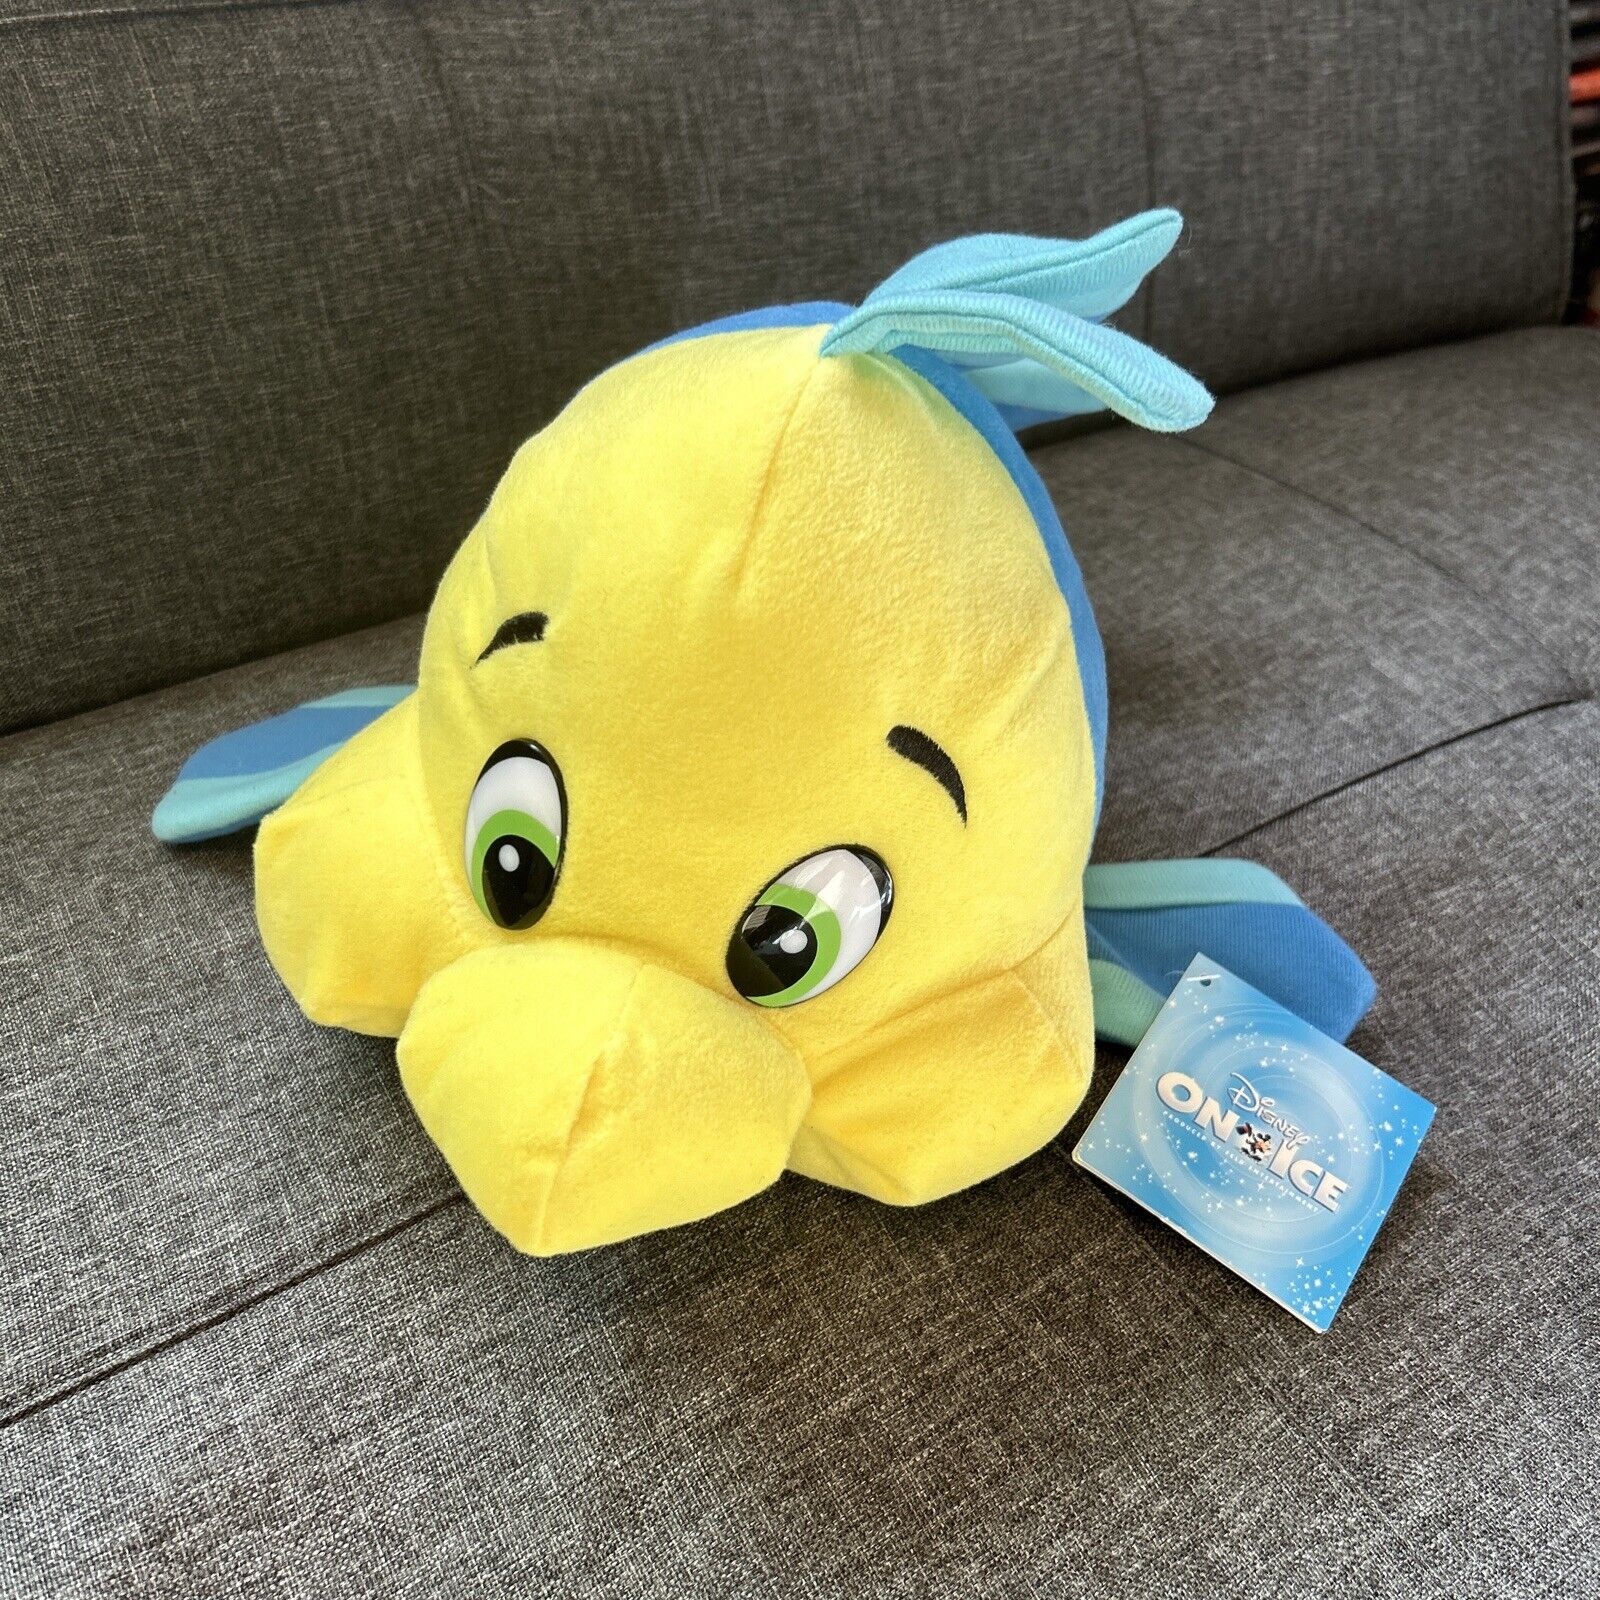 New With Tag - Flounder 13” Plush Toy - Disney On Ice - Little Mermaid Doll Rare